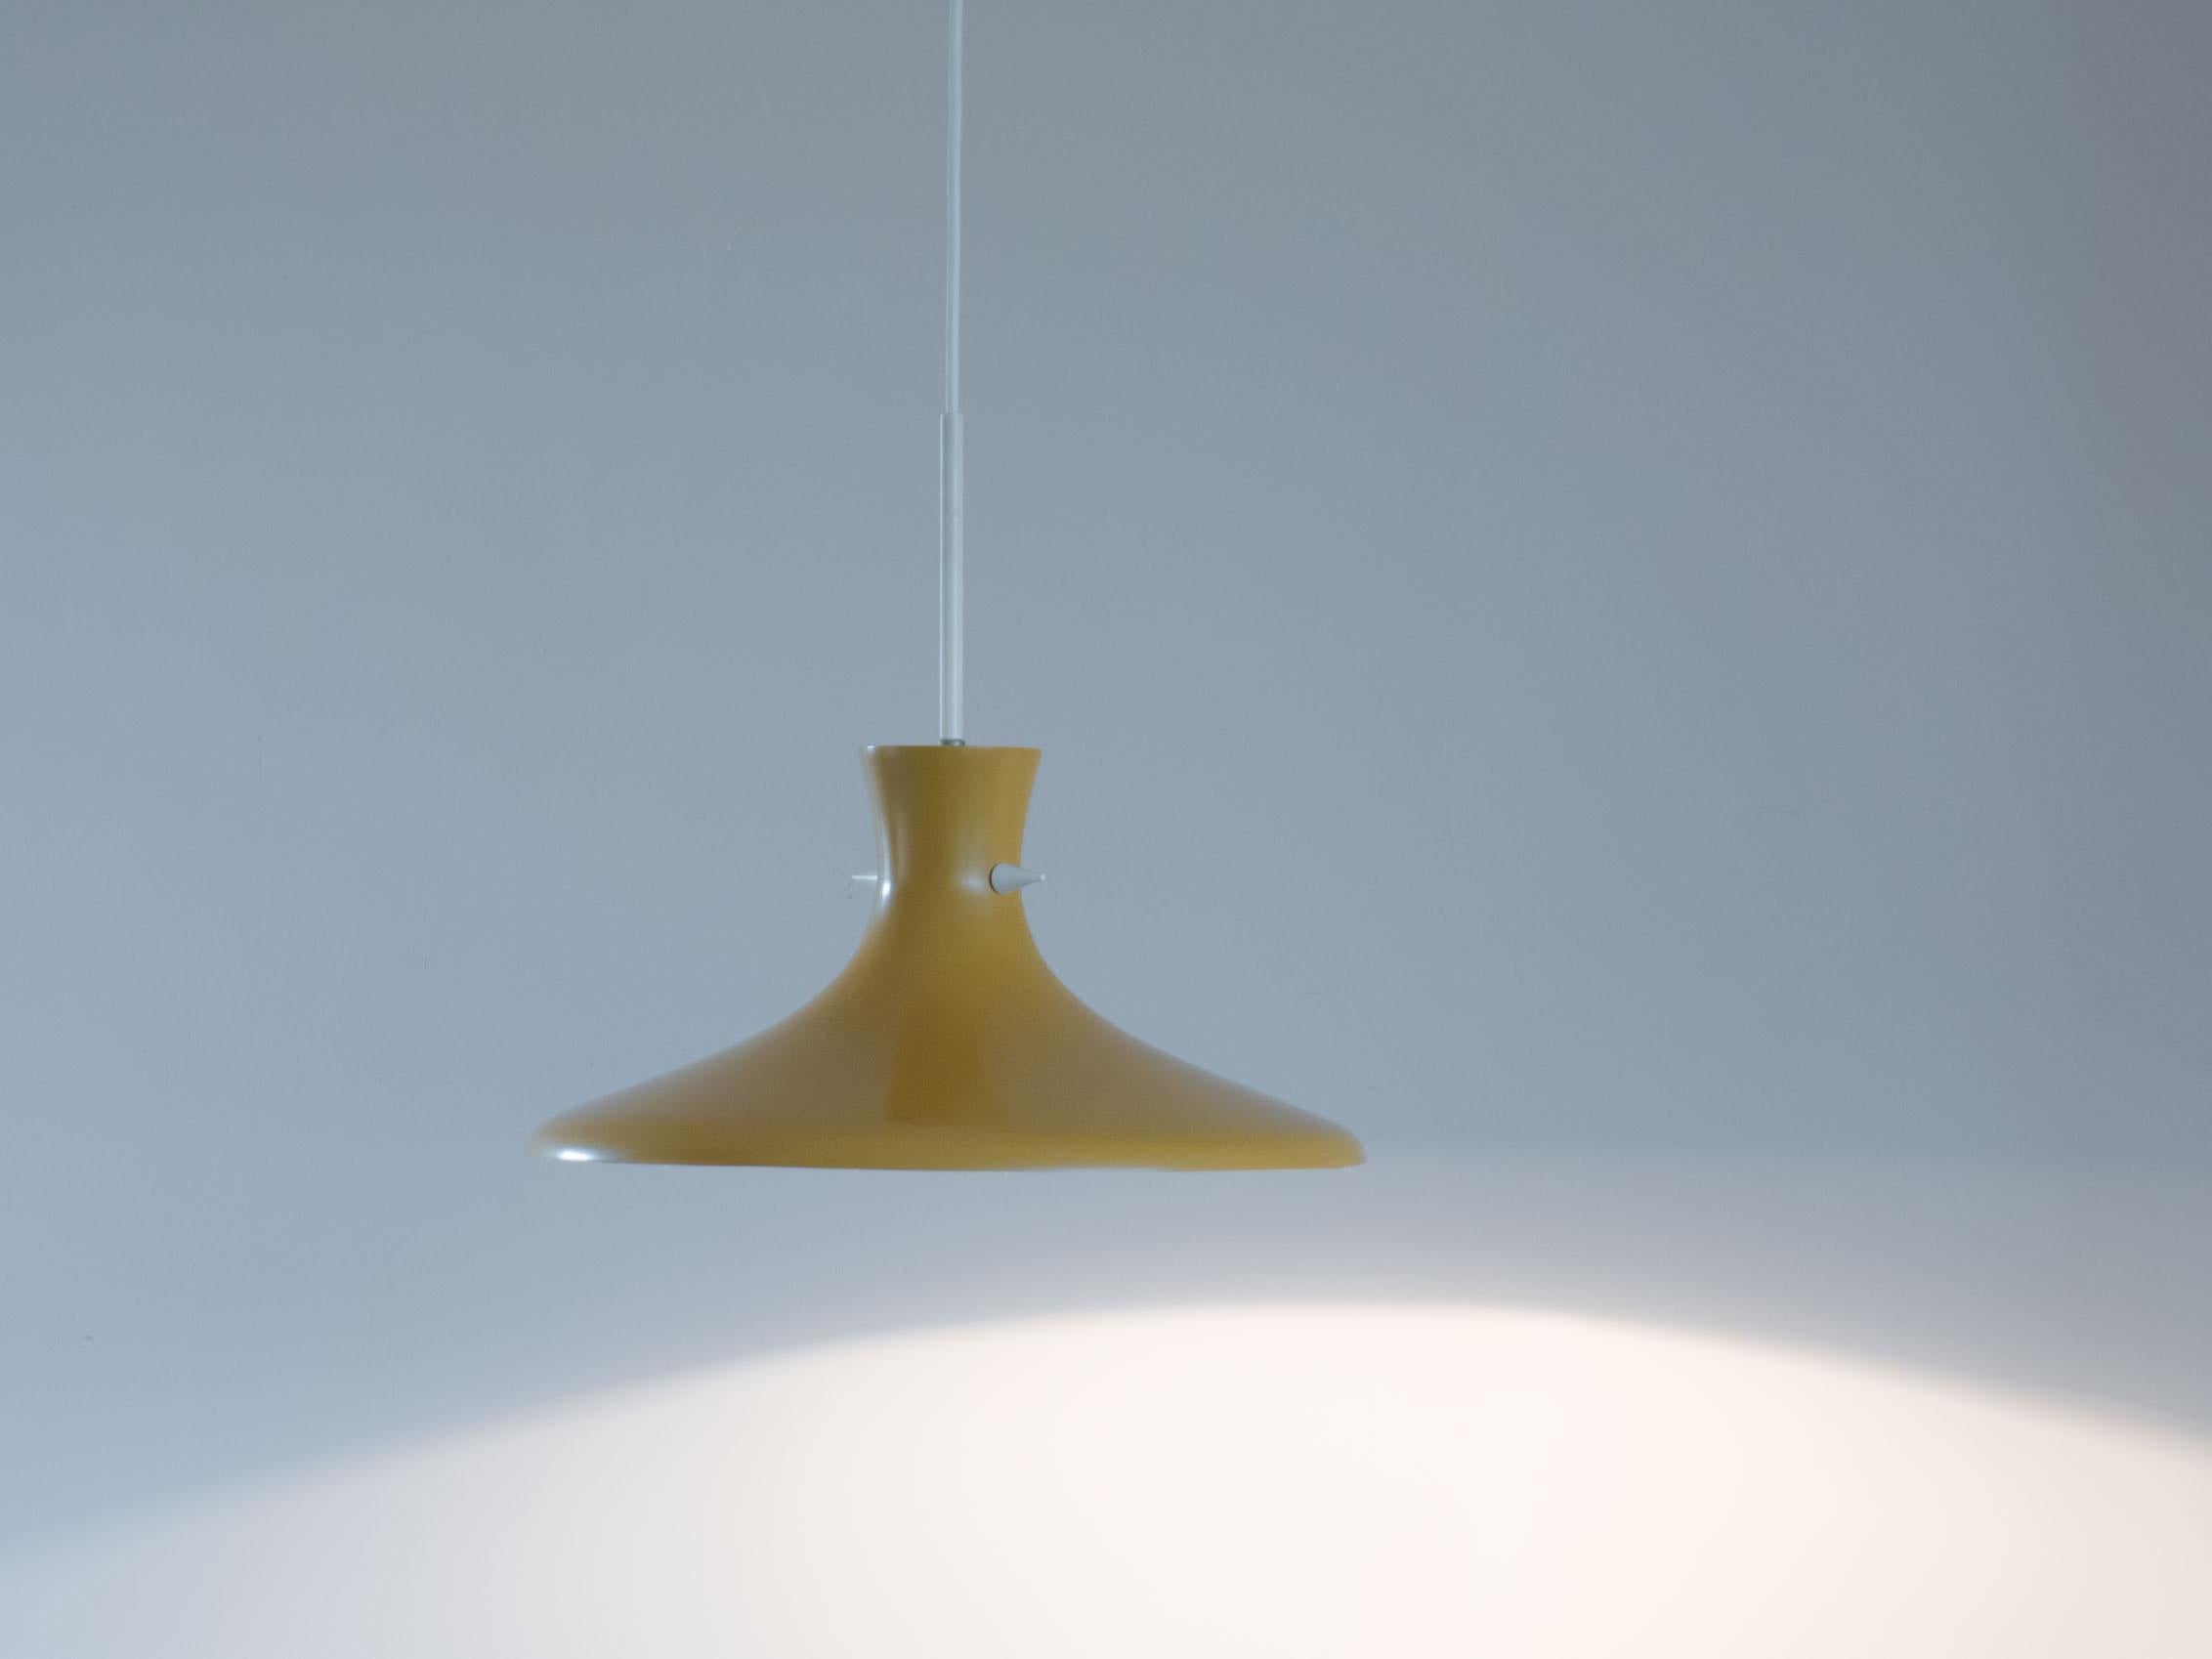 Organically shaped vintage ocre-yellow colored hanging lamp.

This lamp is designed in a very minimal way, the shade has two small white tips to accentuate the shape of the shade.

This lamp is in very good condition. The shade has signs of use